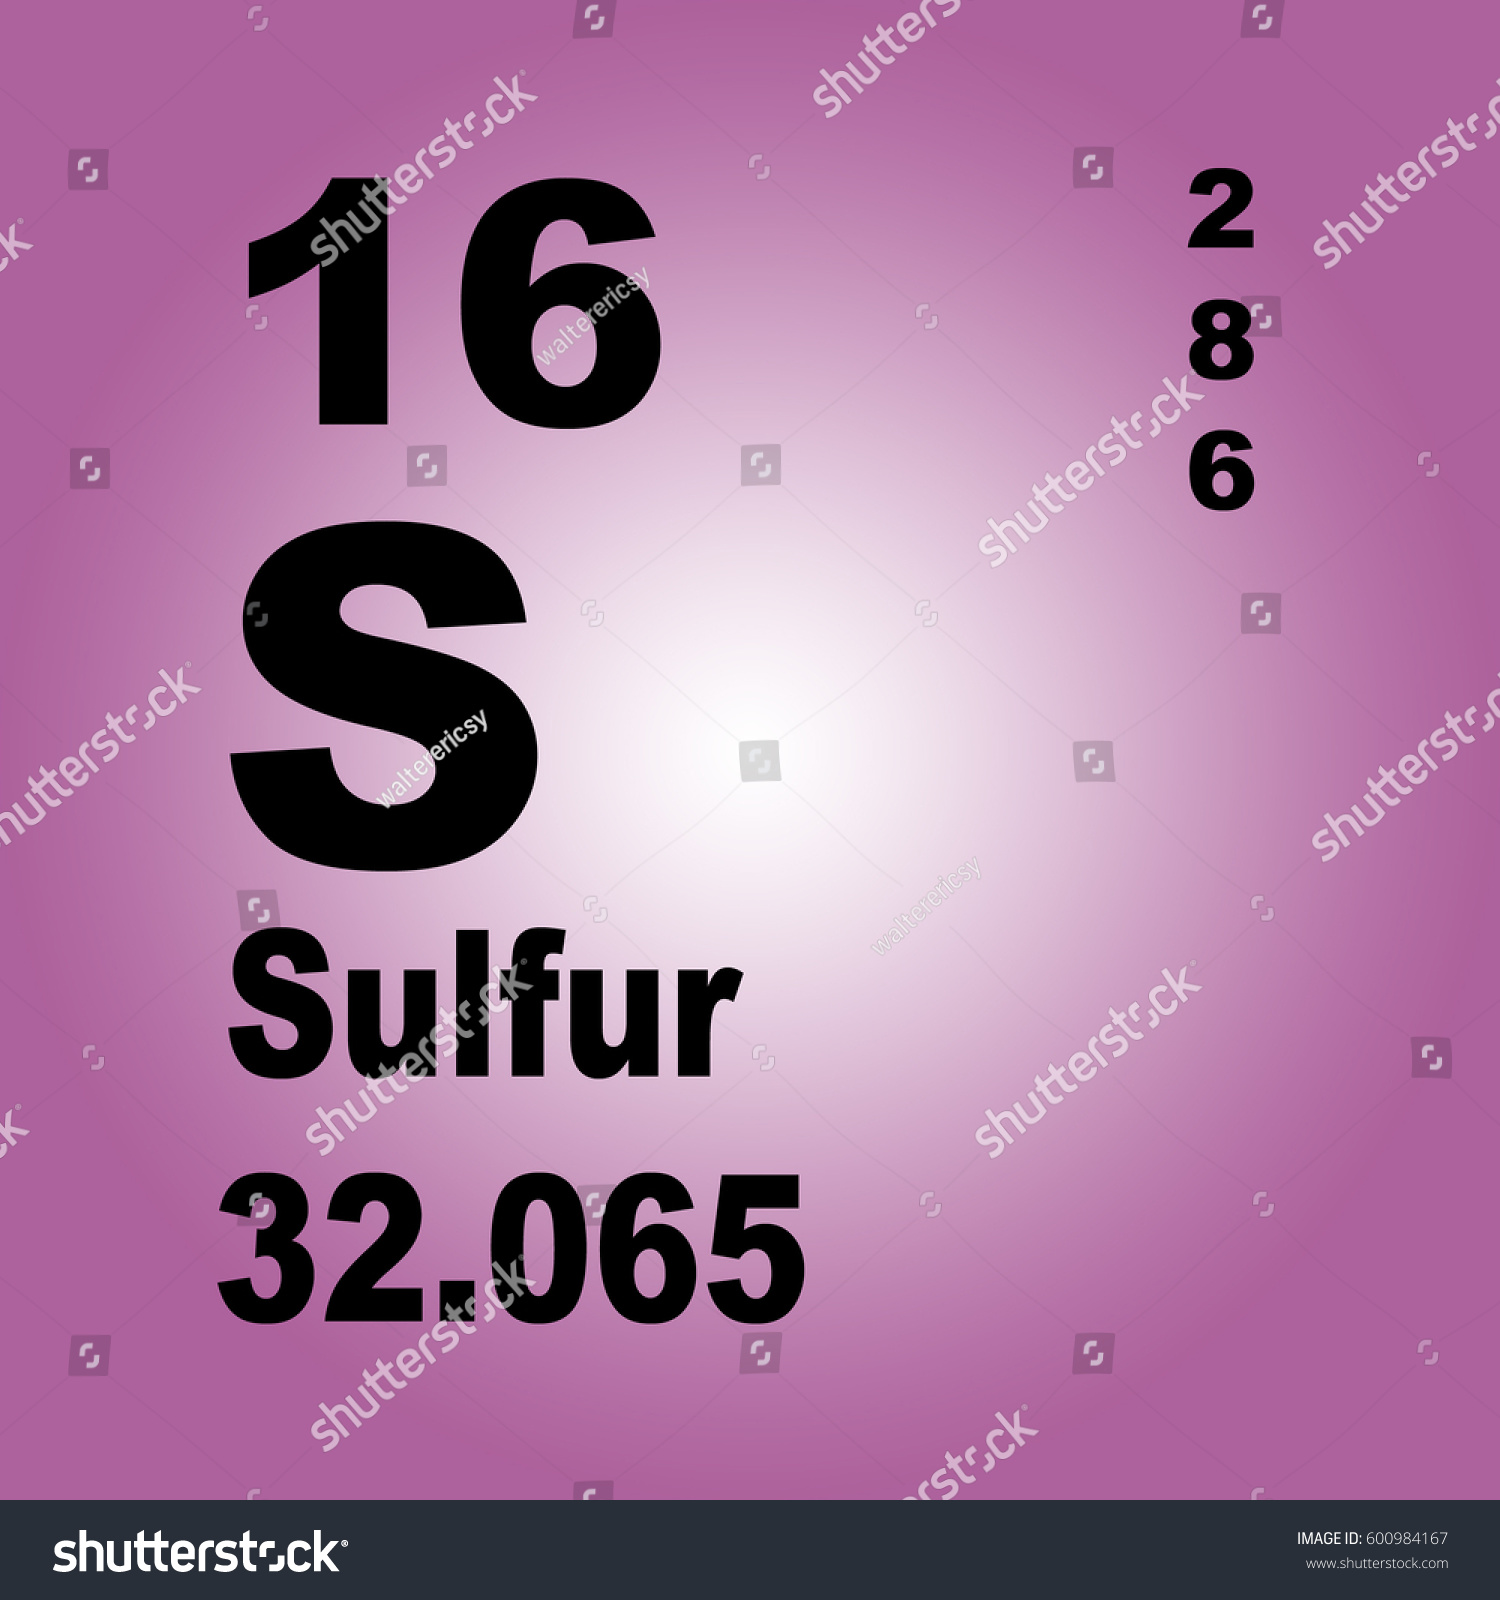 Sulfur Periodic Table of Elements #600984167